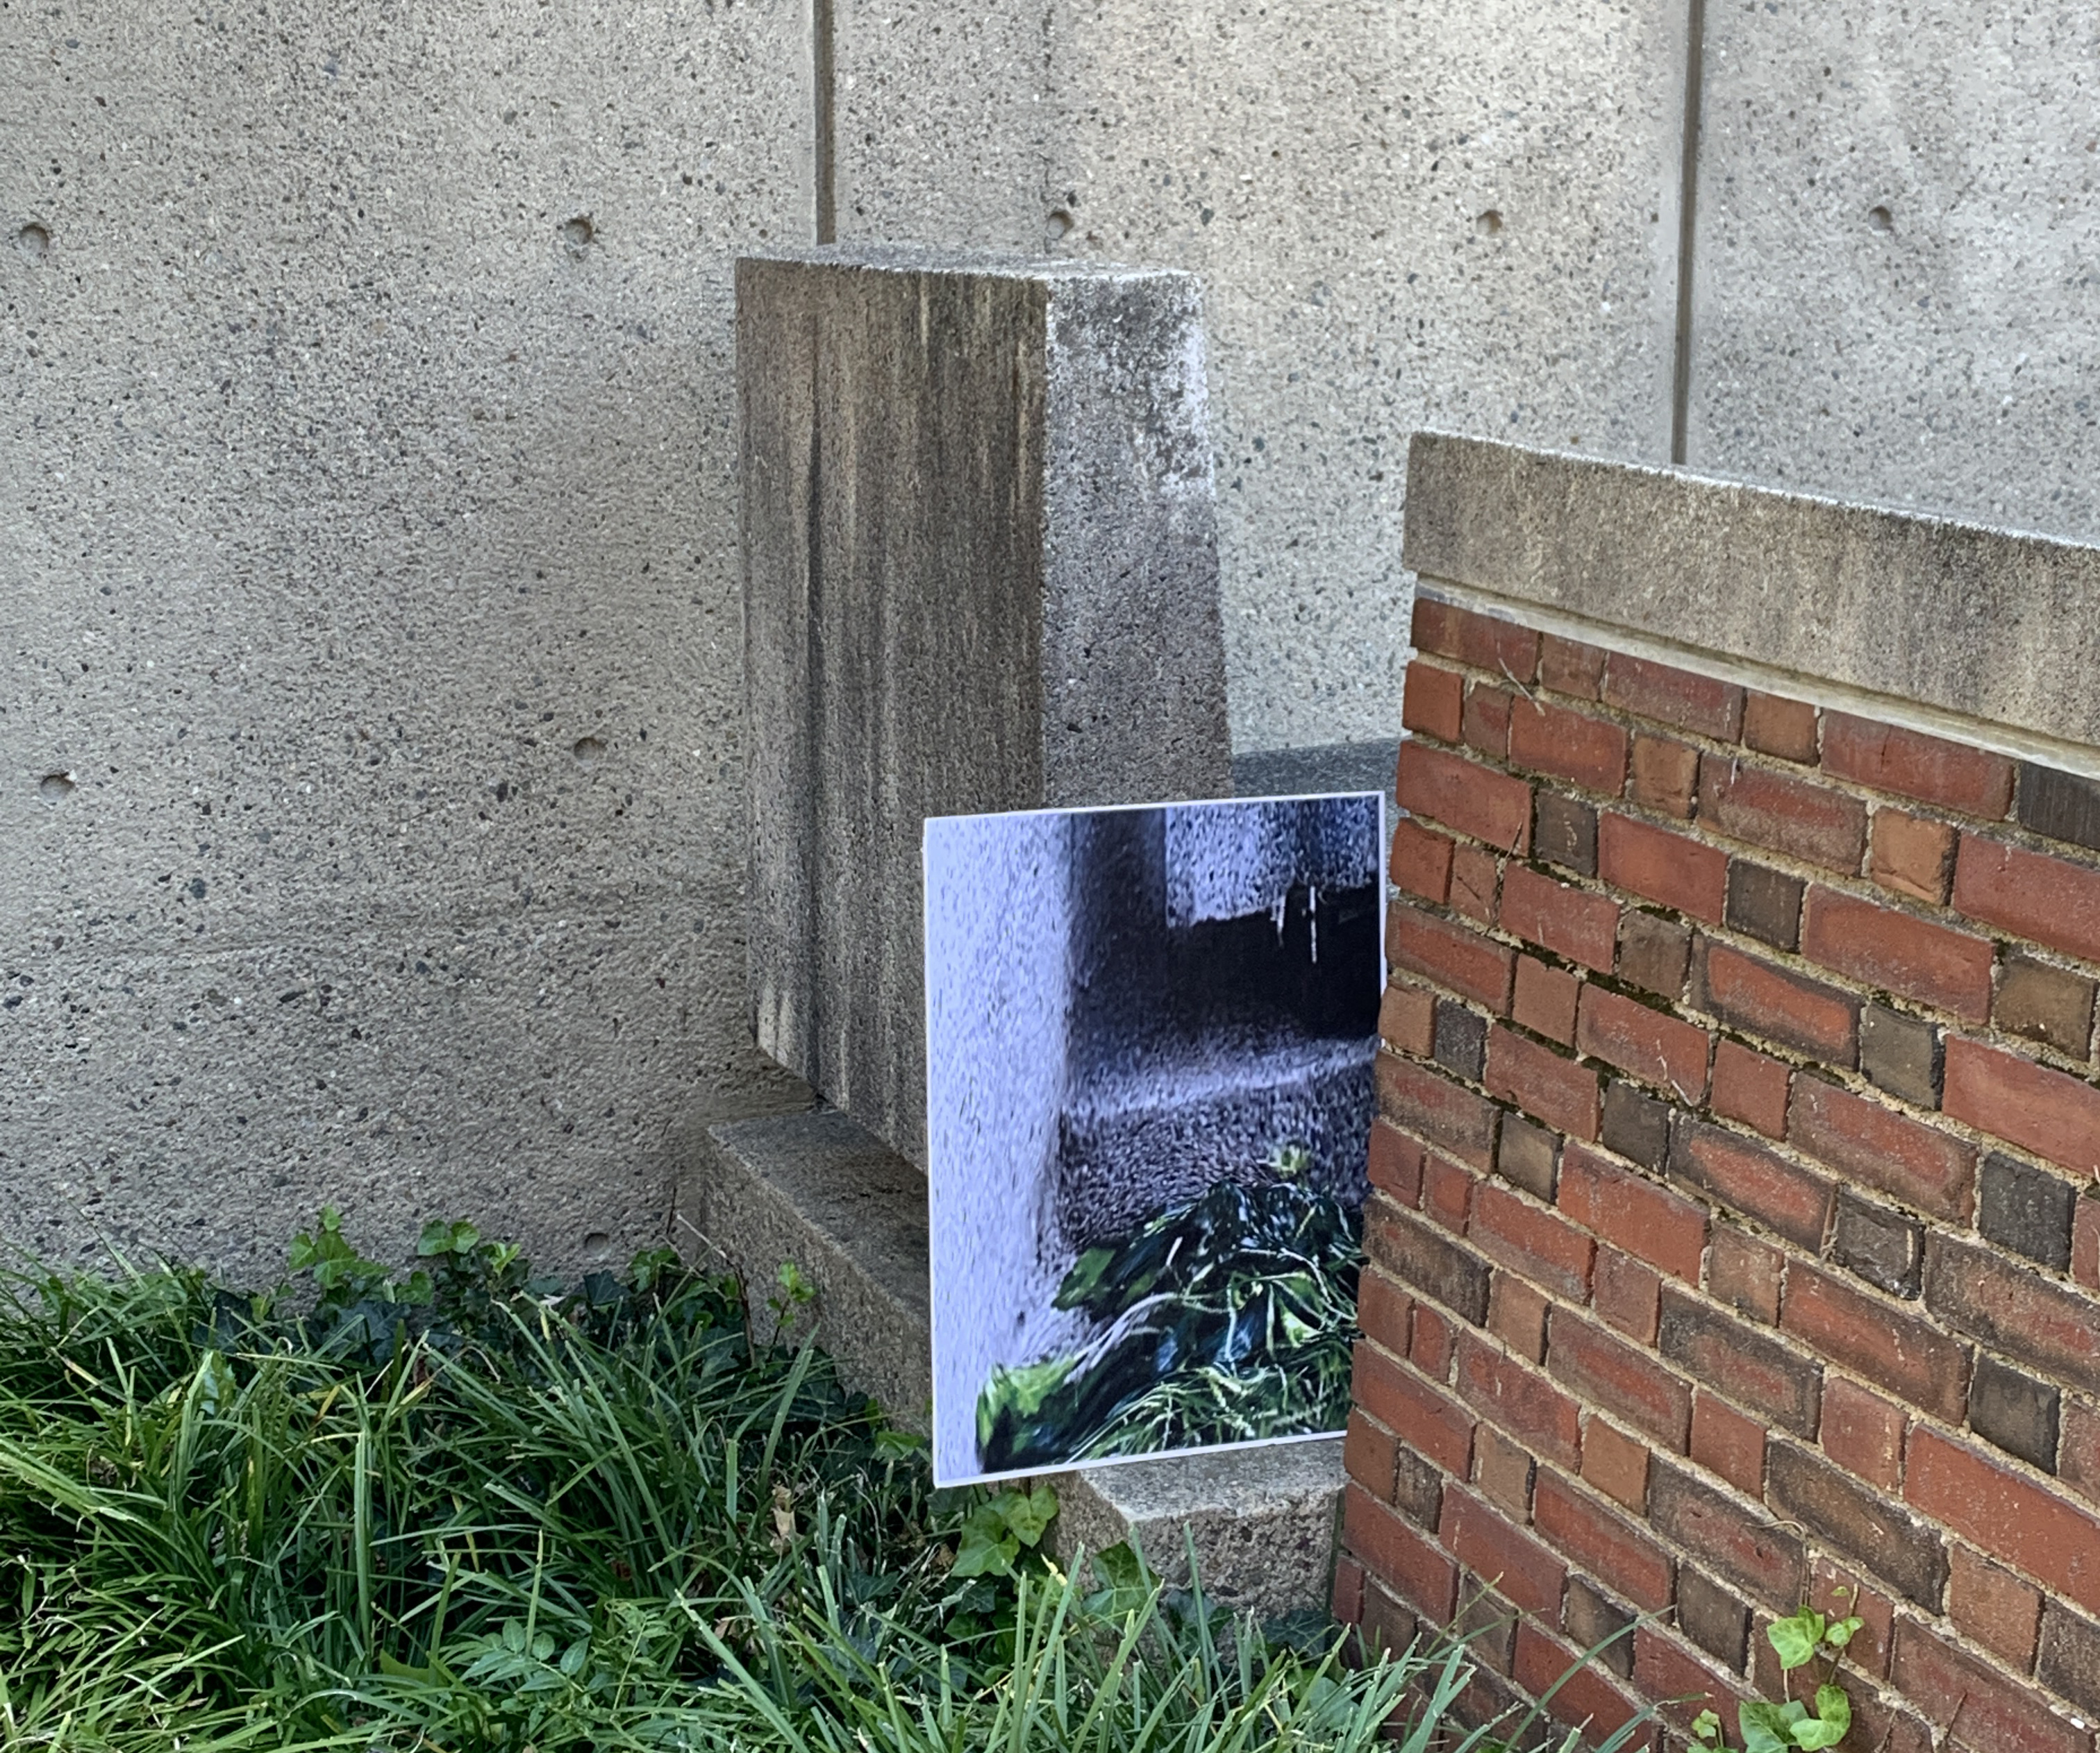 a photo of an outdoor space in situ created by Rosanna Valencia for a graduate Architecture class at RISD